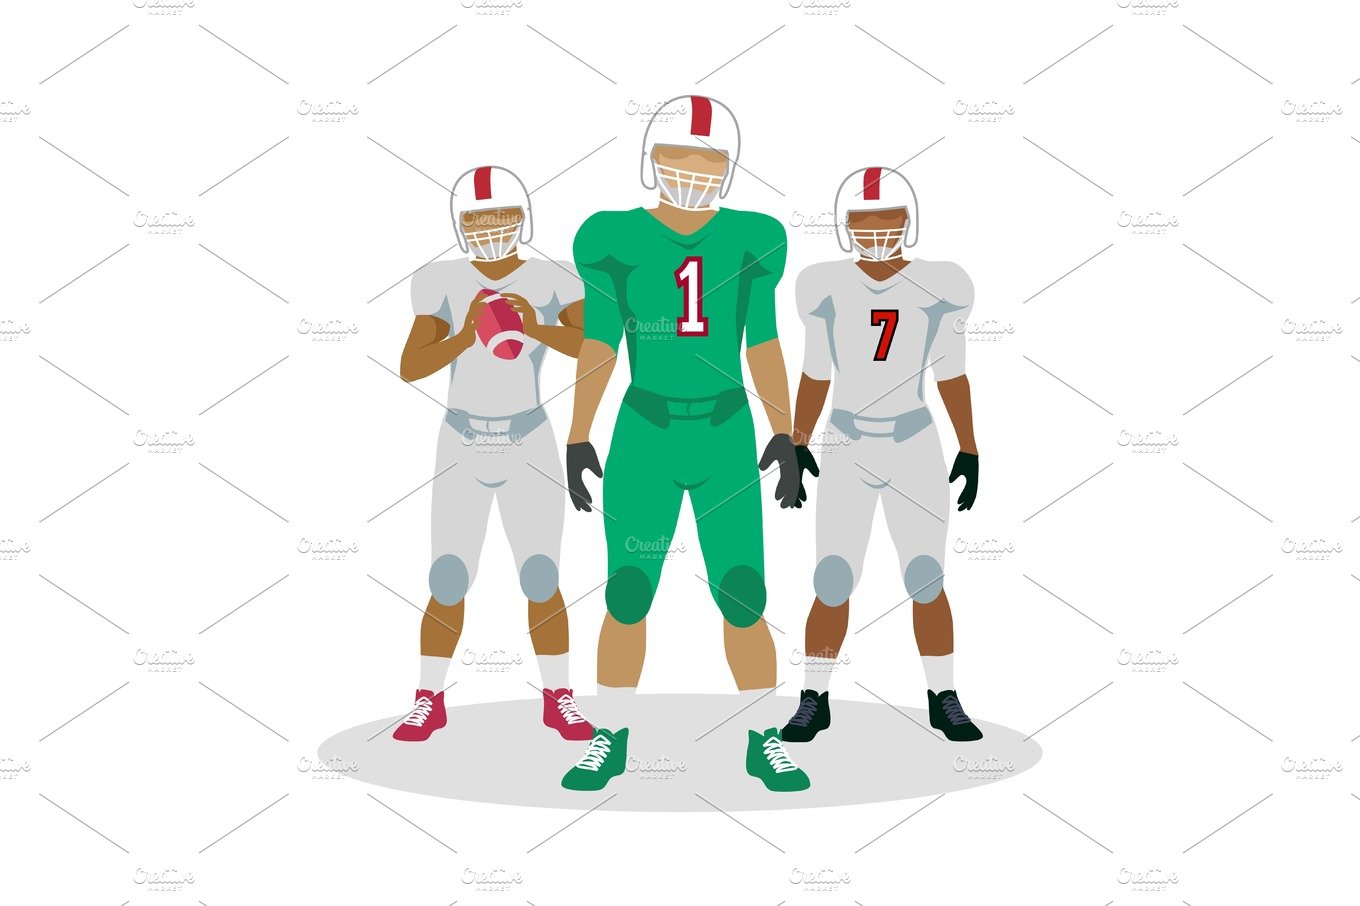 American Football Players in Equipment with Ball cover image.